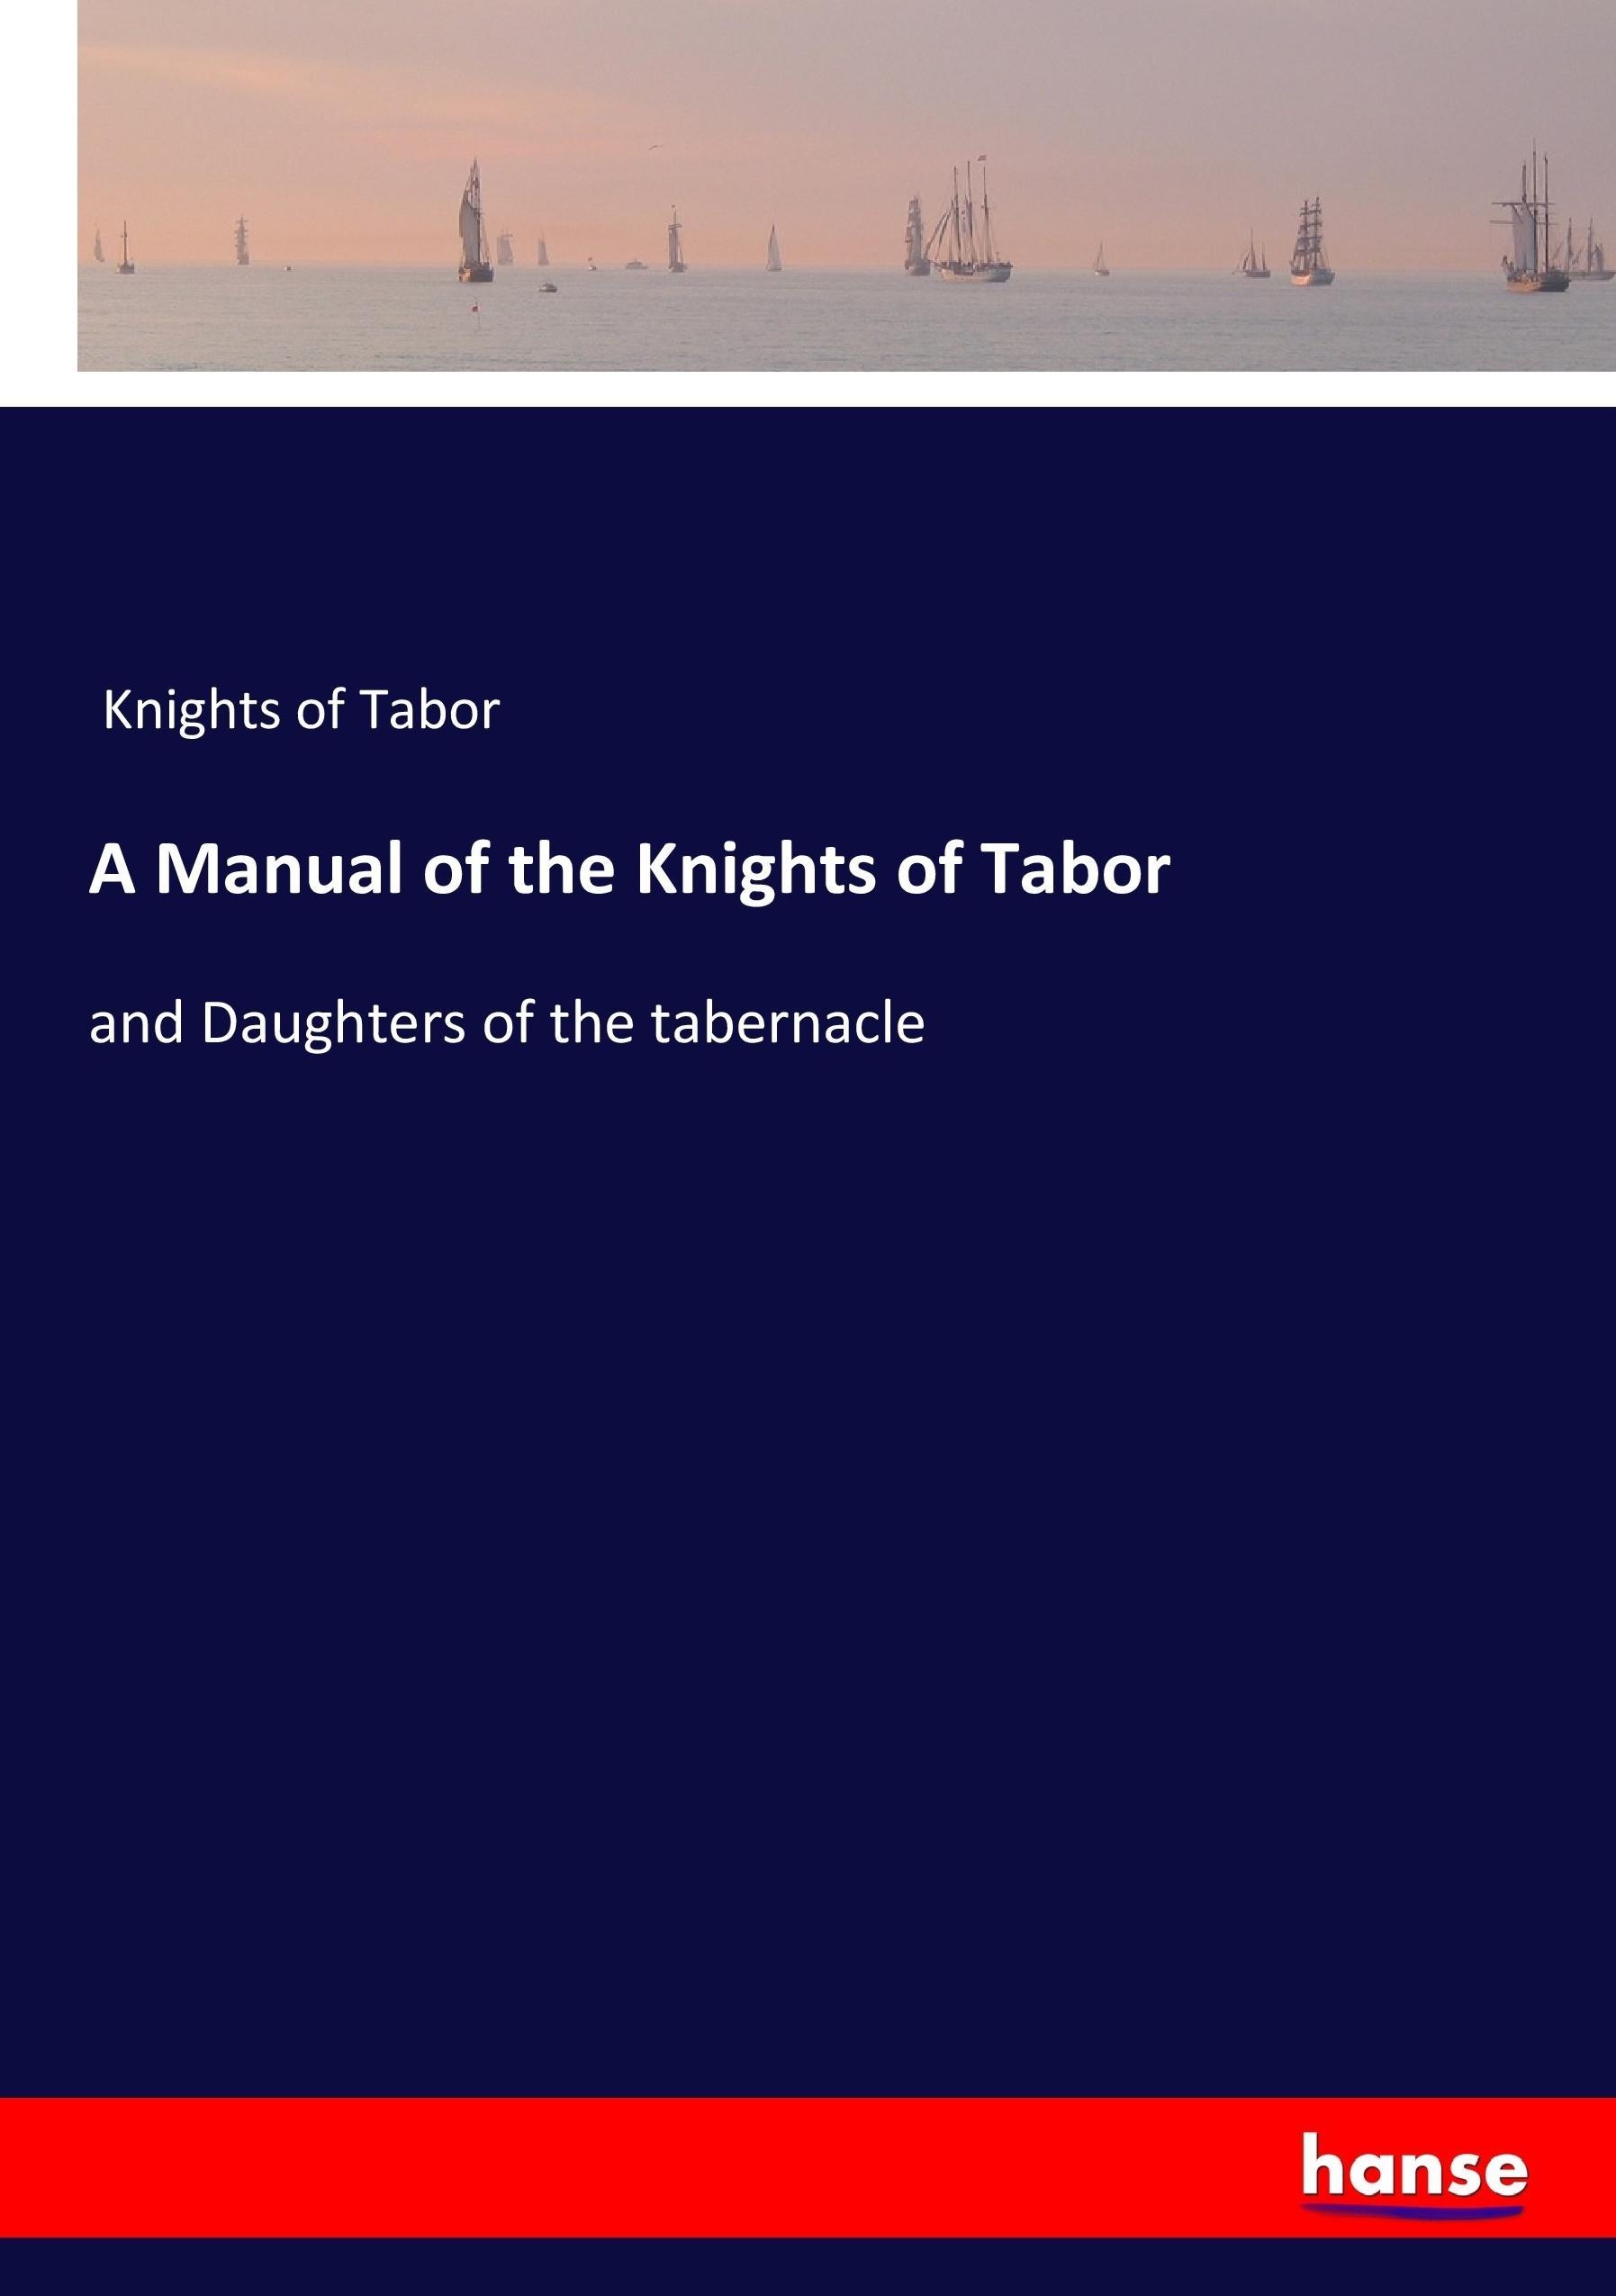 A Manual of the Knights of Tabor - Knights of Tabor